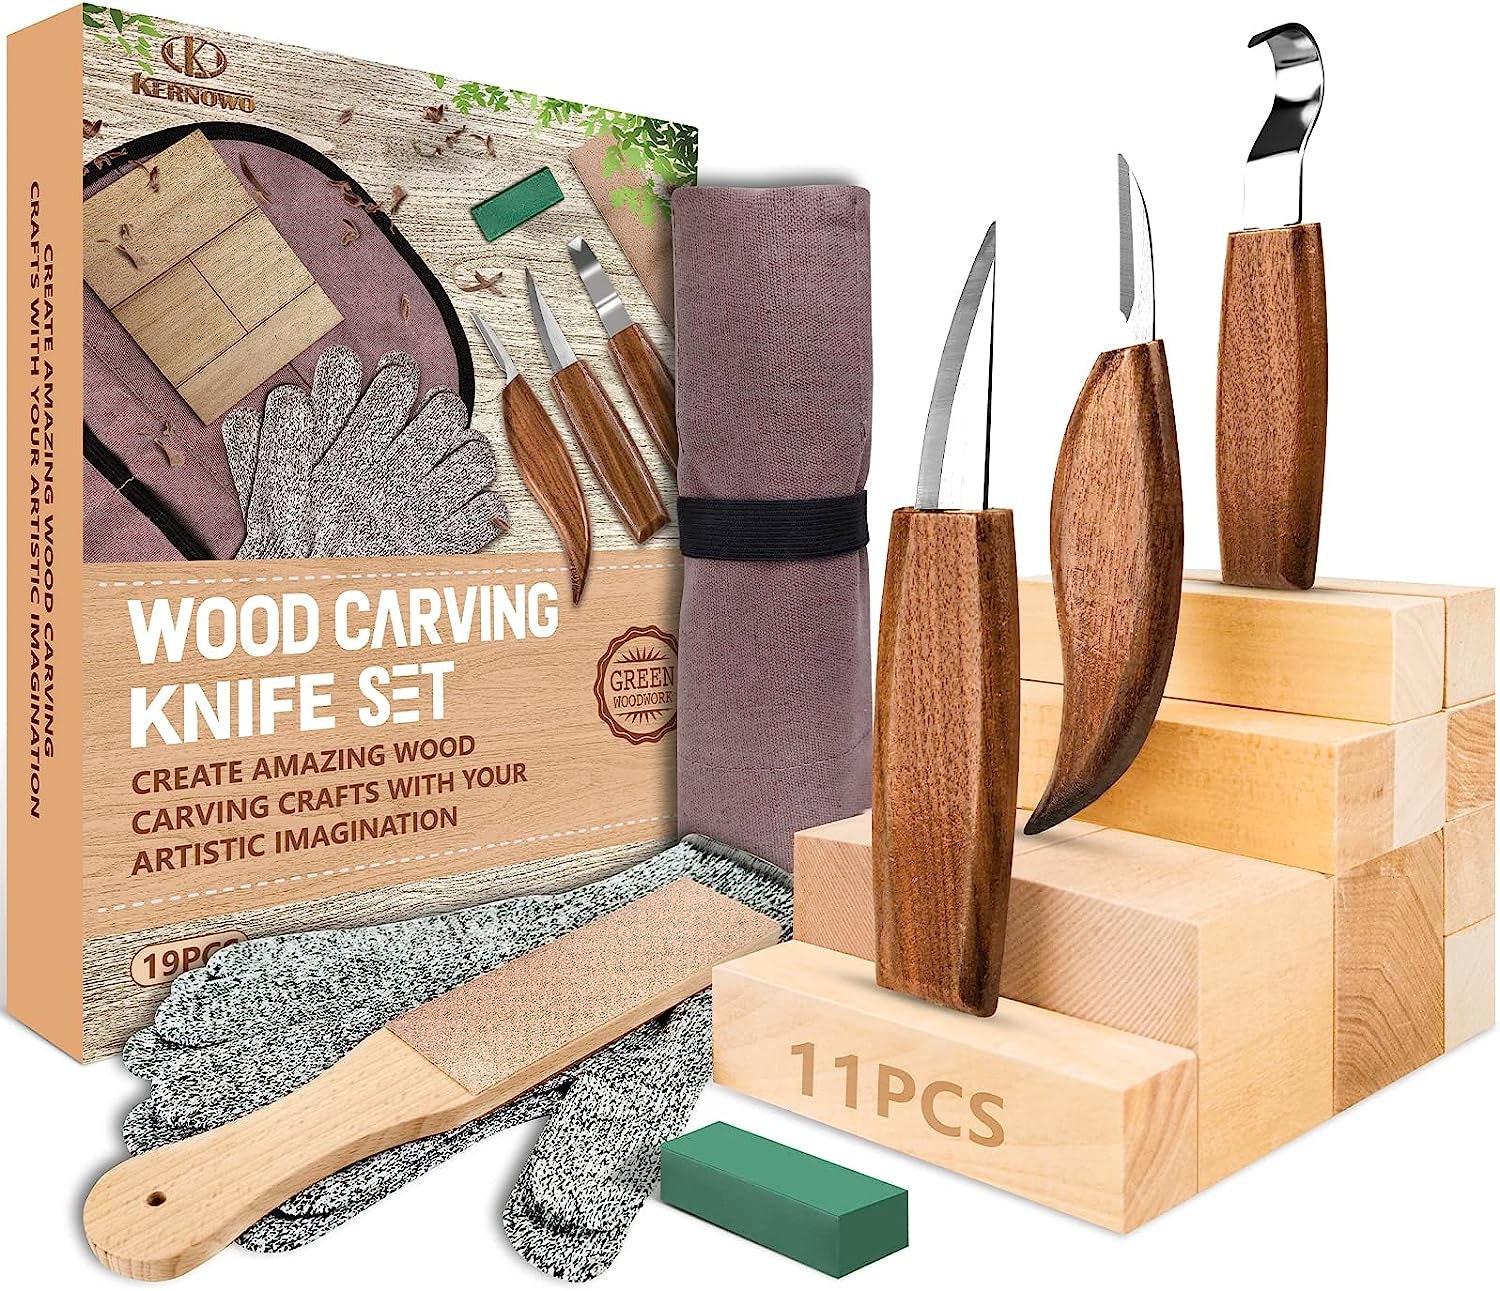 Whittling Kit-Wood Carving Tools Kit with 5 pcs Whittling Knife-Widdling  Kit for Spoon, Bowl Or Woodwork-Woodworking Kit Gifts for Men-Wood Carving